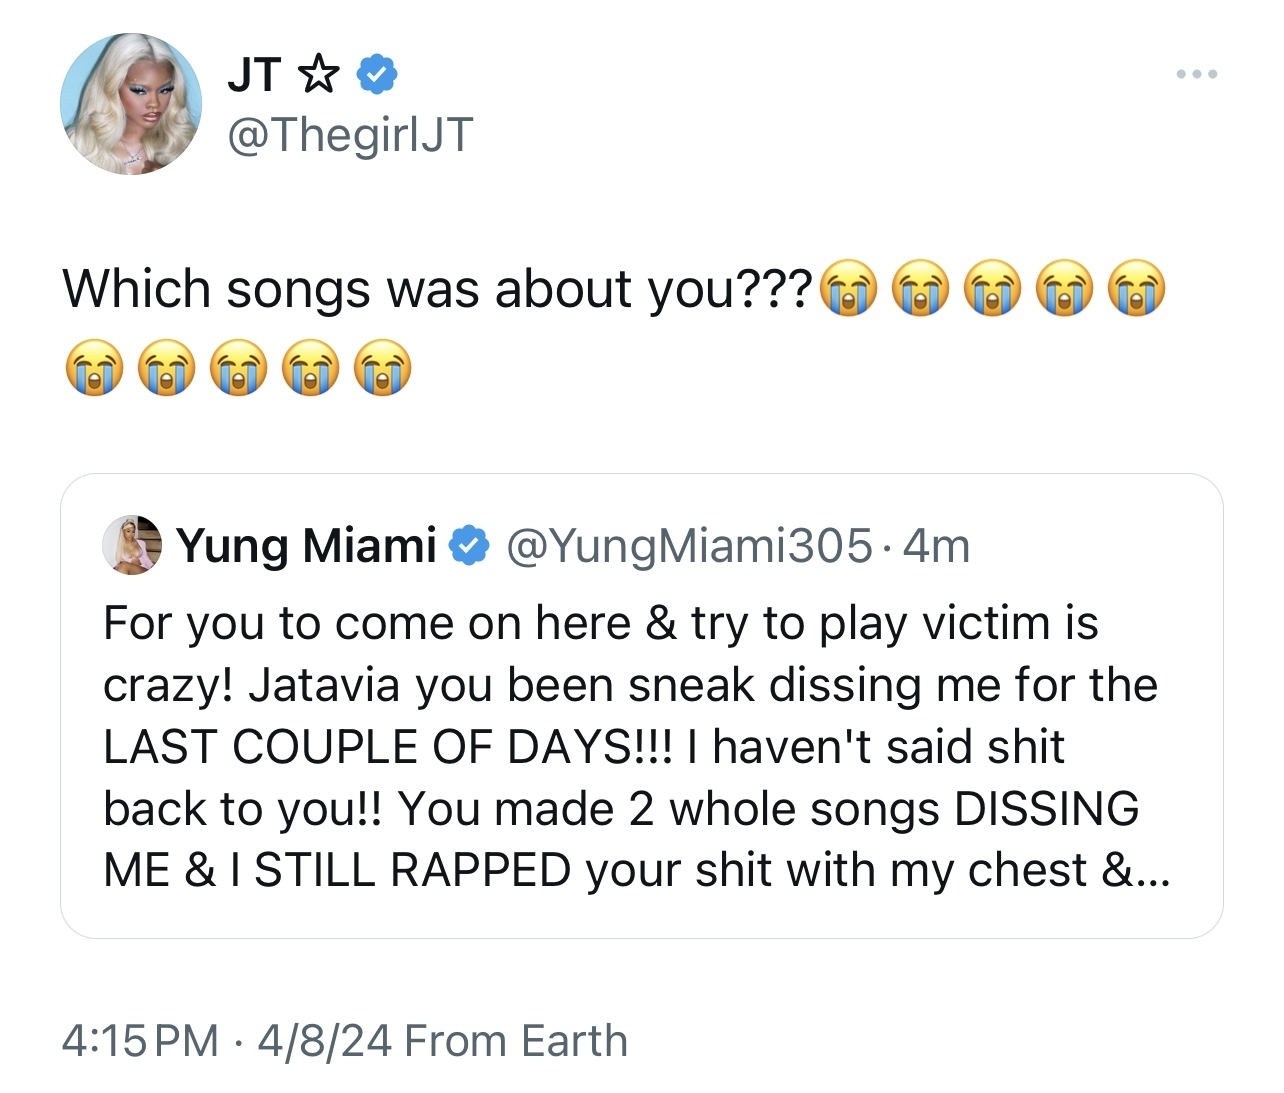 Two tweets from JT and Yung Miami discussing a disagreement over songs written about someone, expressing emotions and conflict